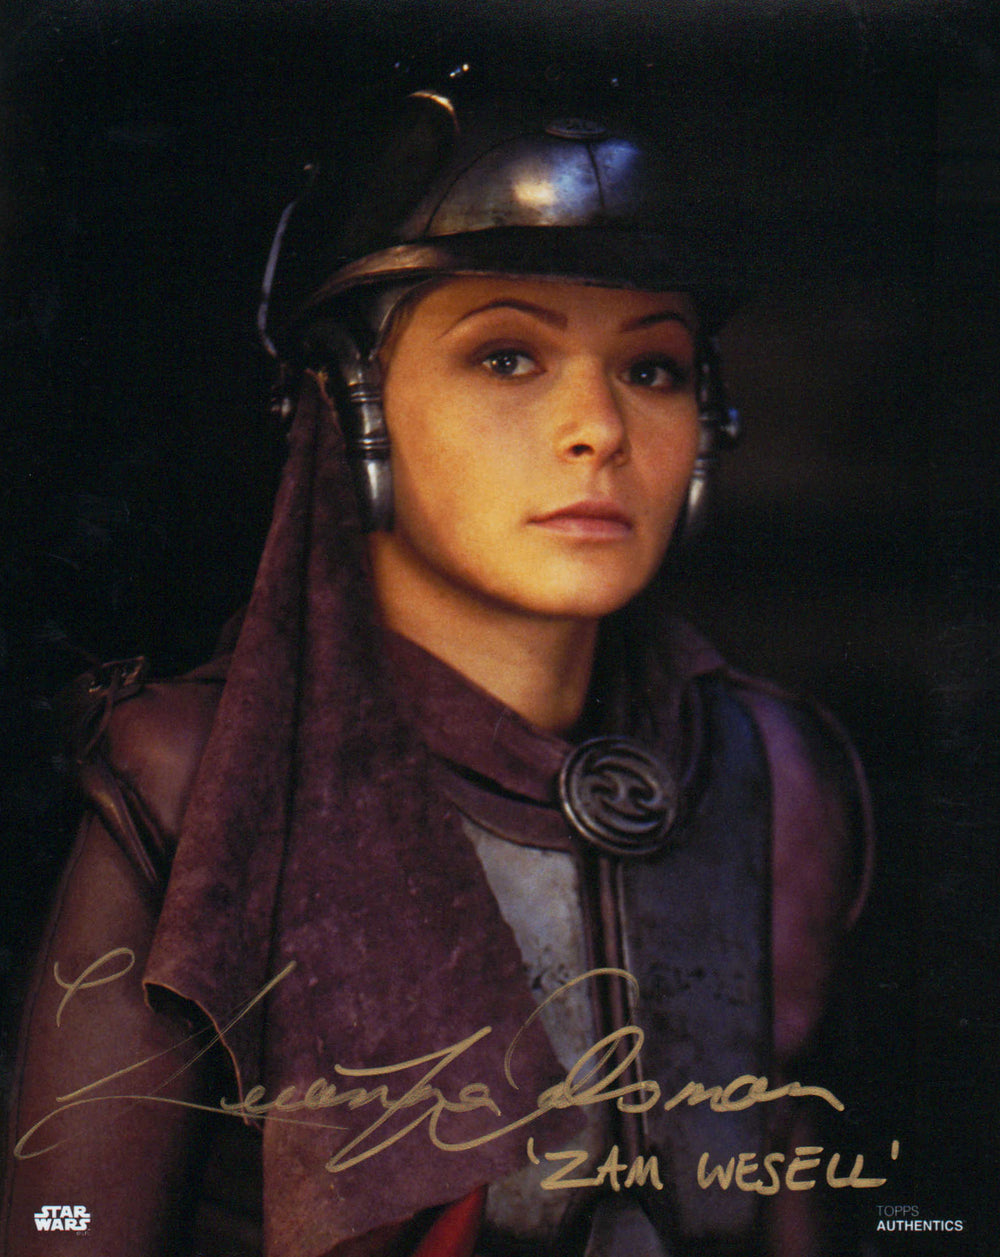 Leeanna Walsman as Zam Wesell from Star Wars Episode II: Attack of the Clones Signed 8x10 Photo with Character Name